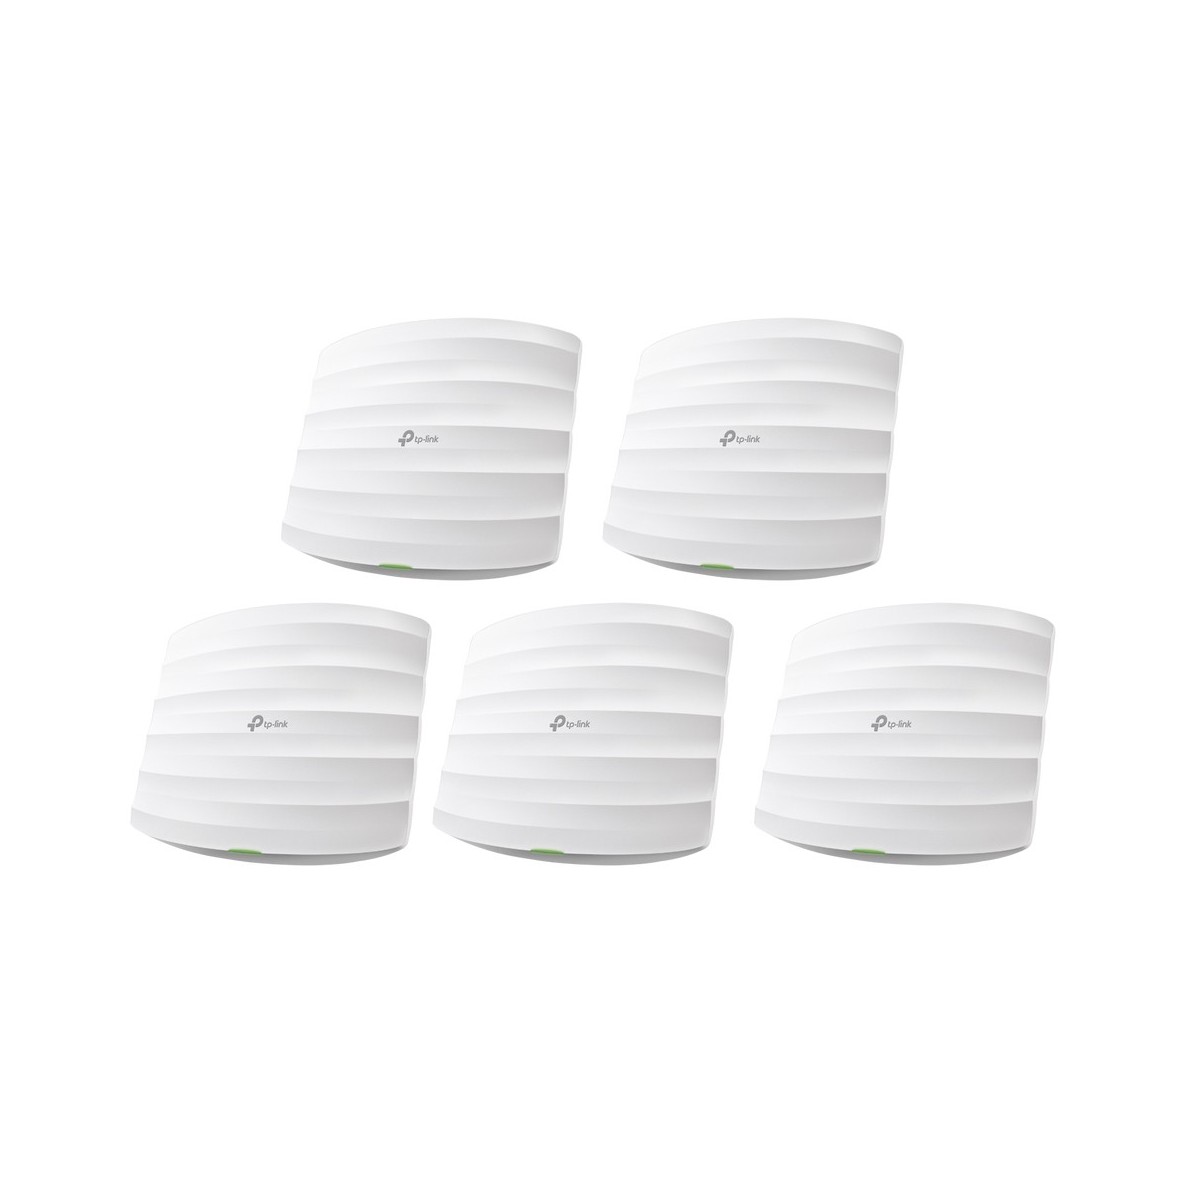 OMADA EAP245 V3 - Acces Point - Dual Band - 2.4Ghz / 5Ghz - 5 pack